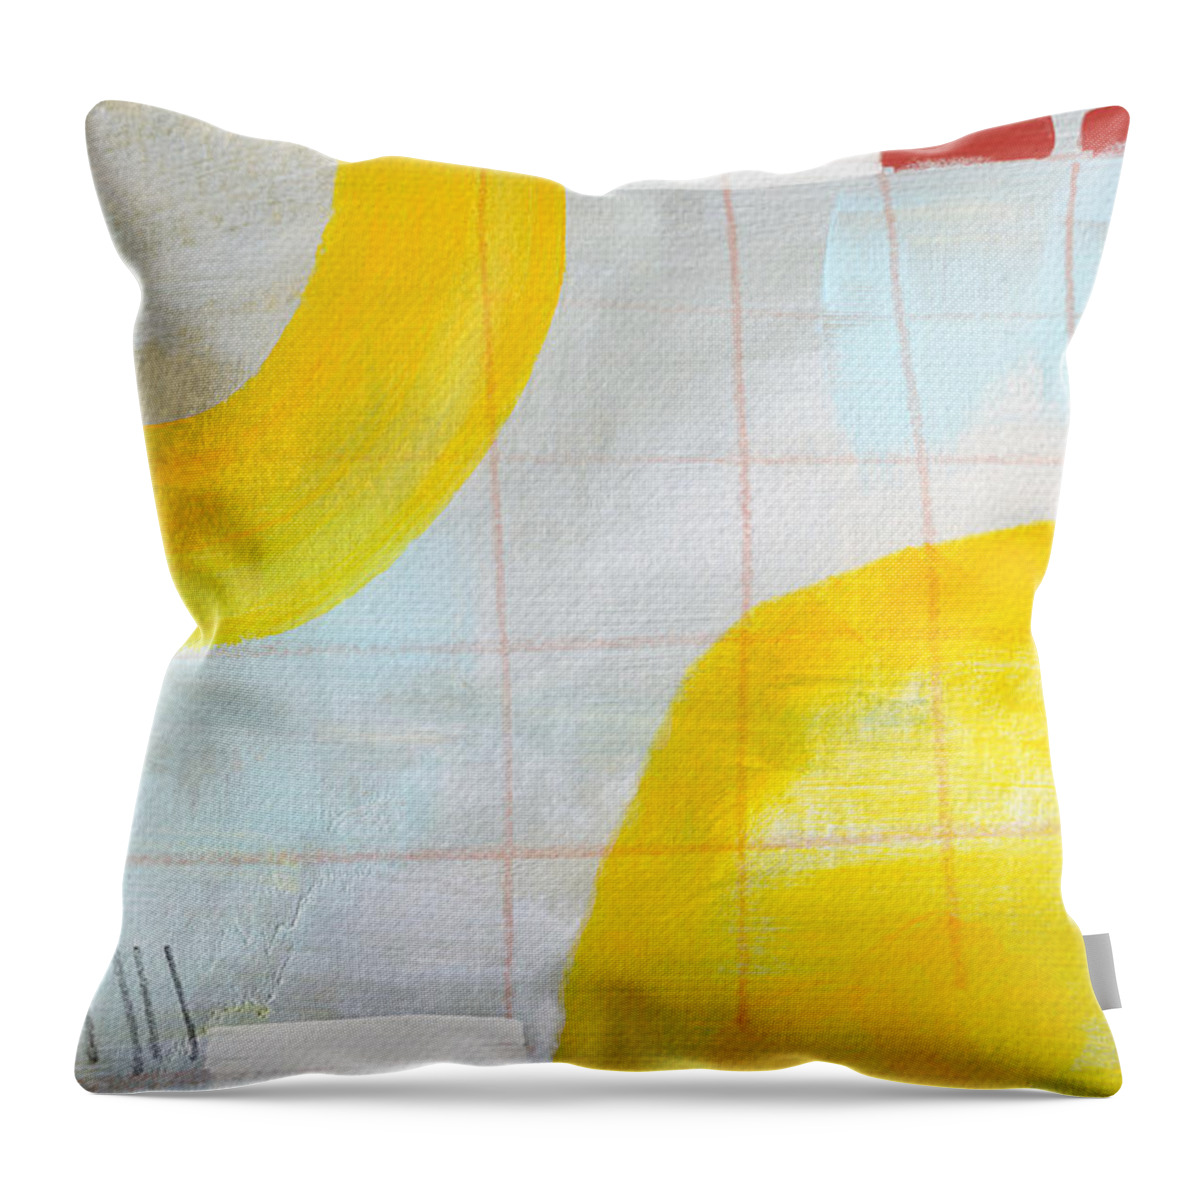 Abstract Throw Pillow featuring the painting Keeping The Sun In- Abstract Art by Linda Woods by Linda Woods